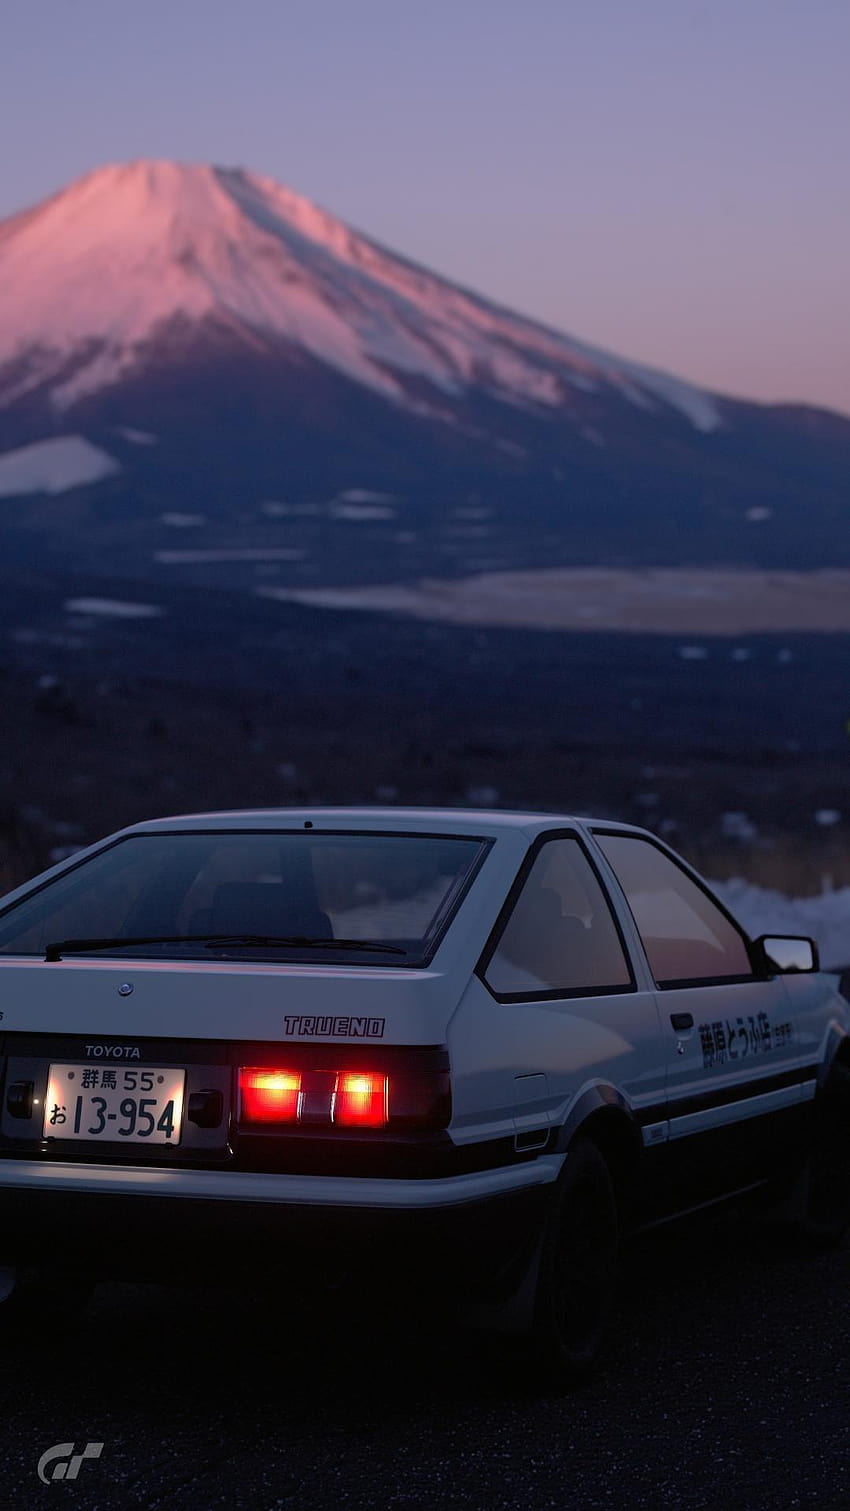 Phone for any who want it : initiald, initial d phone HD phone wallpaper